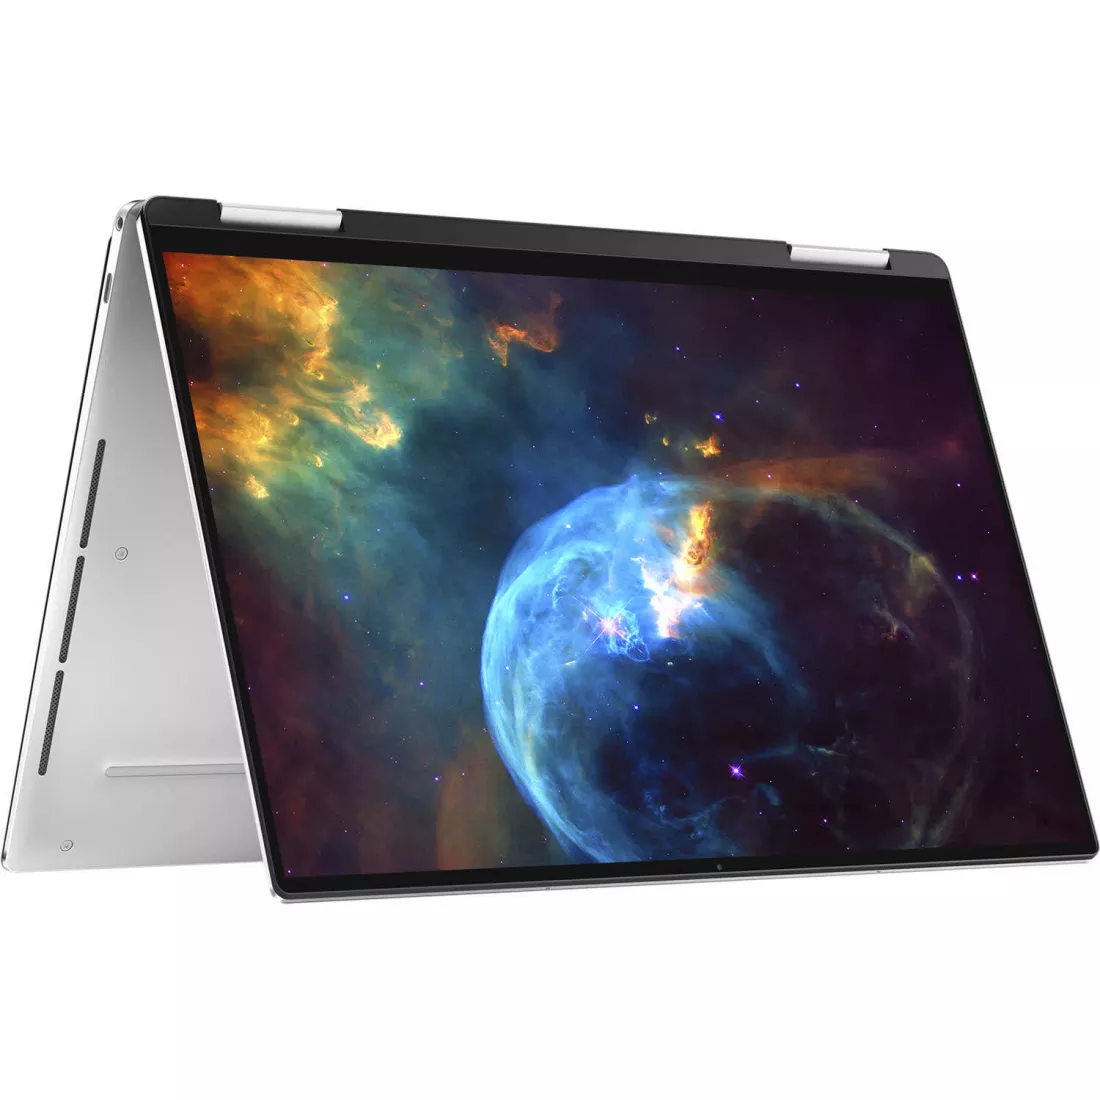 Dell XPS 13 2-in-1 (9310) - Late 2020